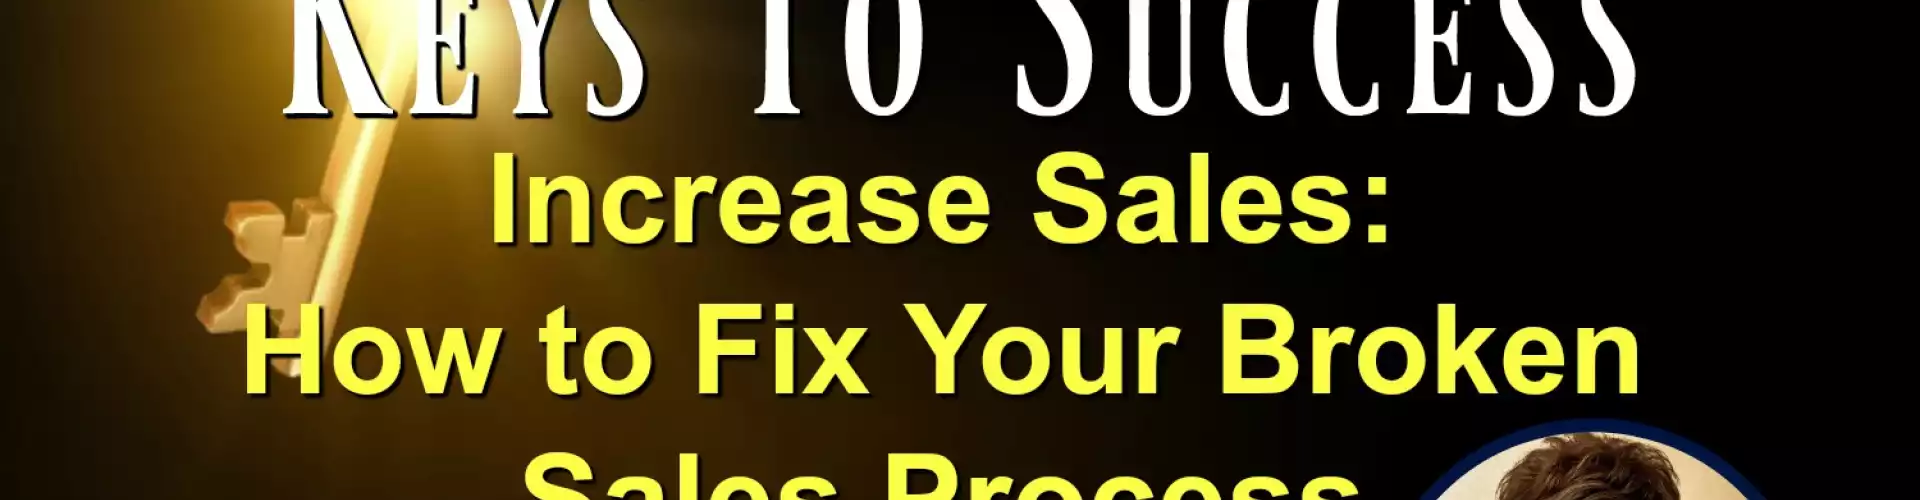 Increase Sales: How to Fix Your Broken Sales Process with Lisa Mininni